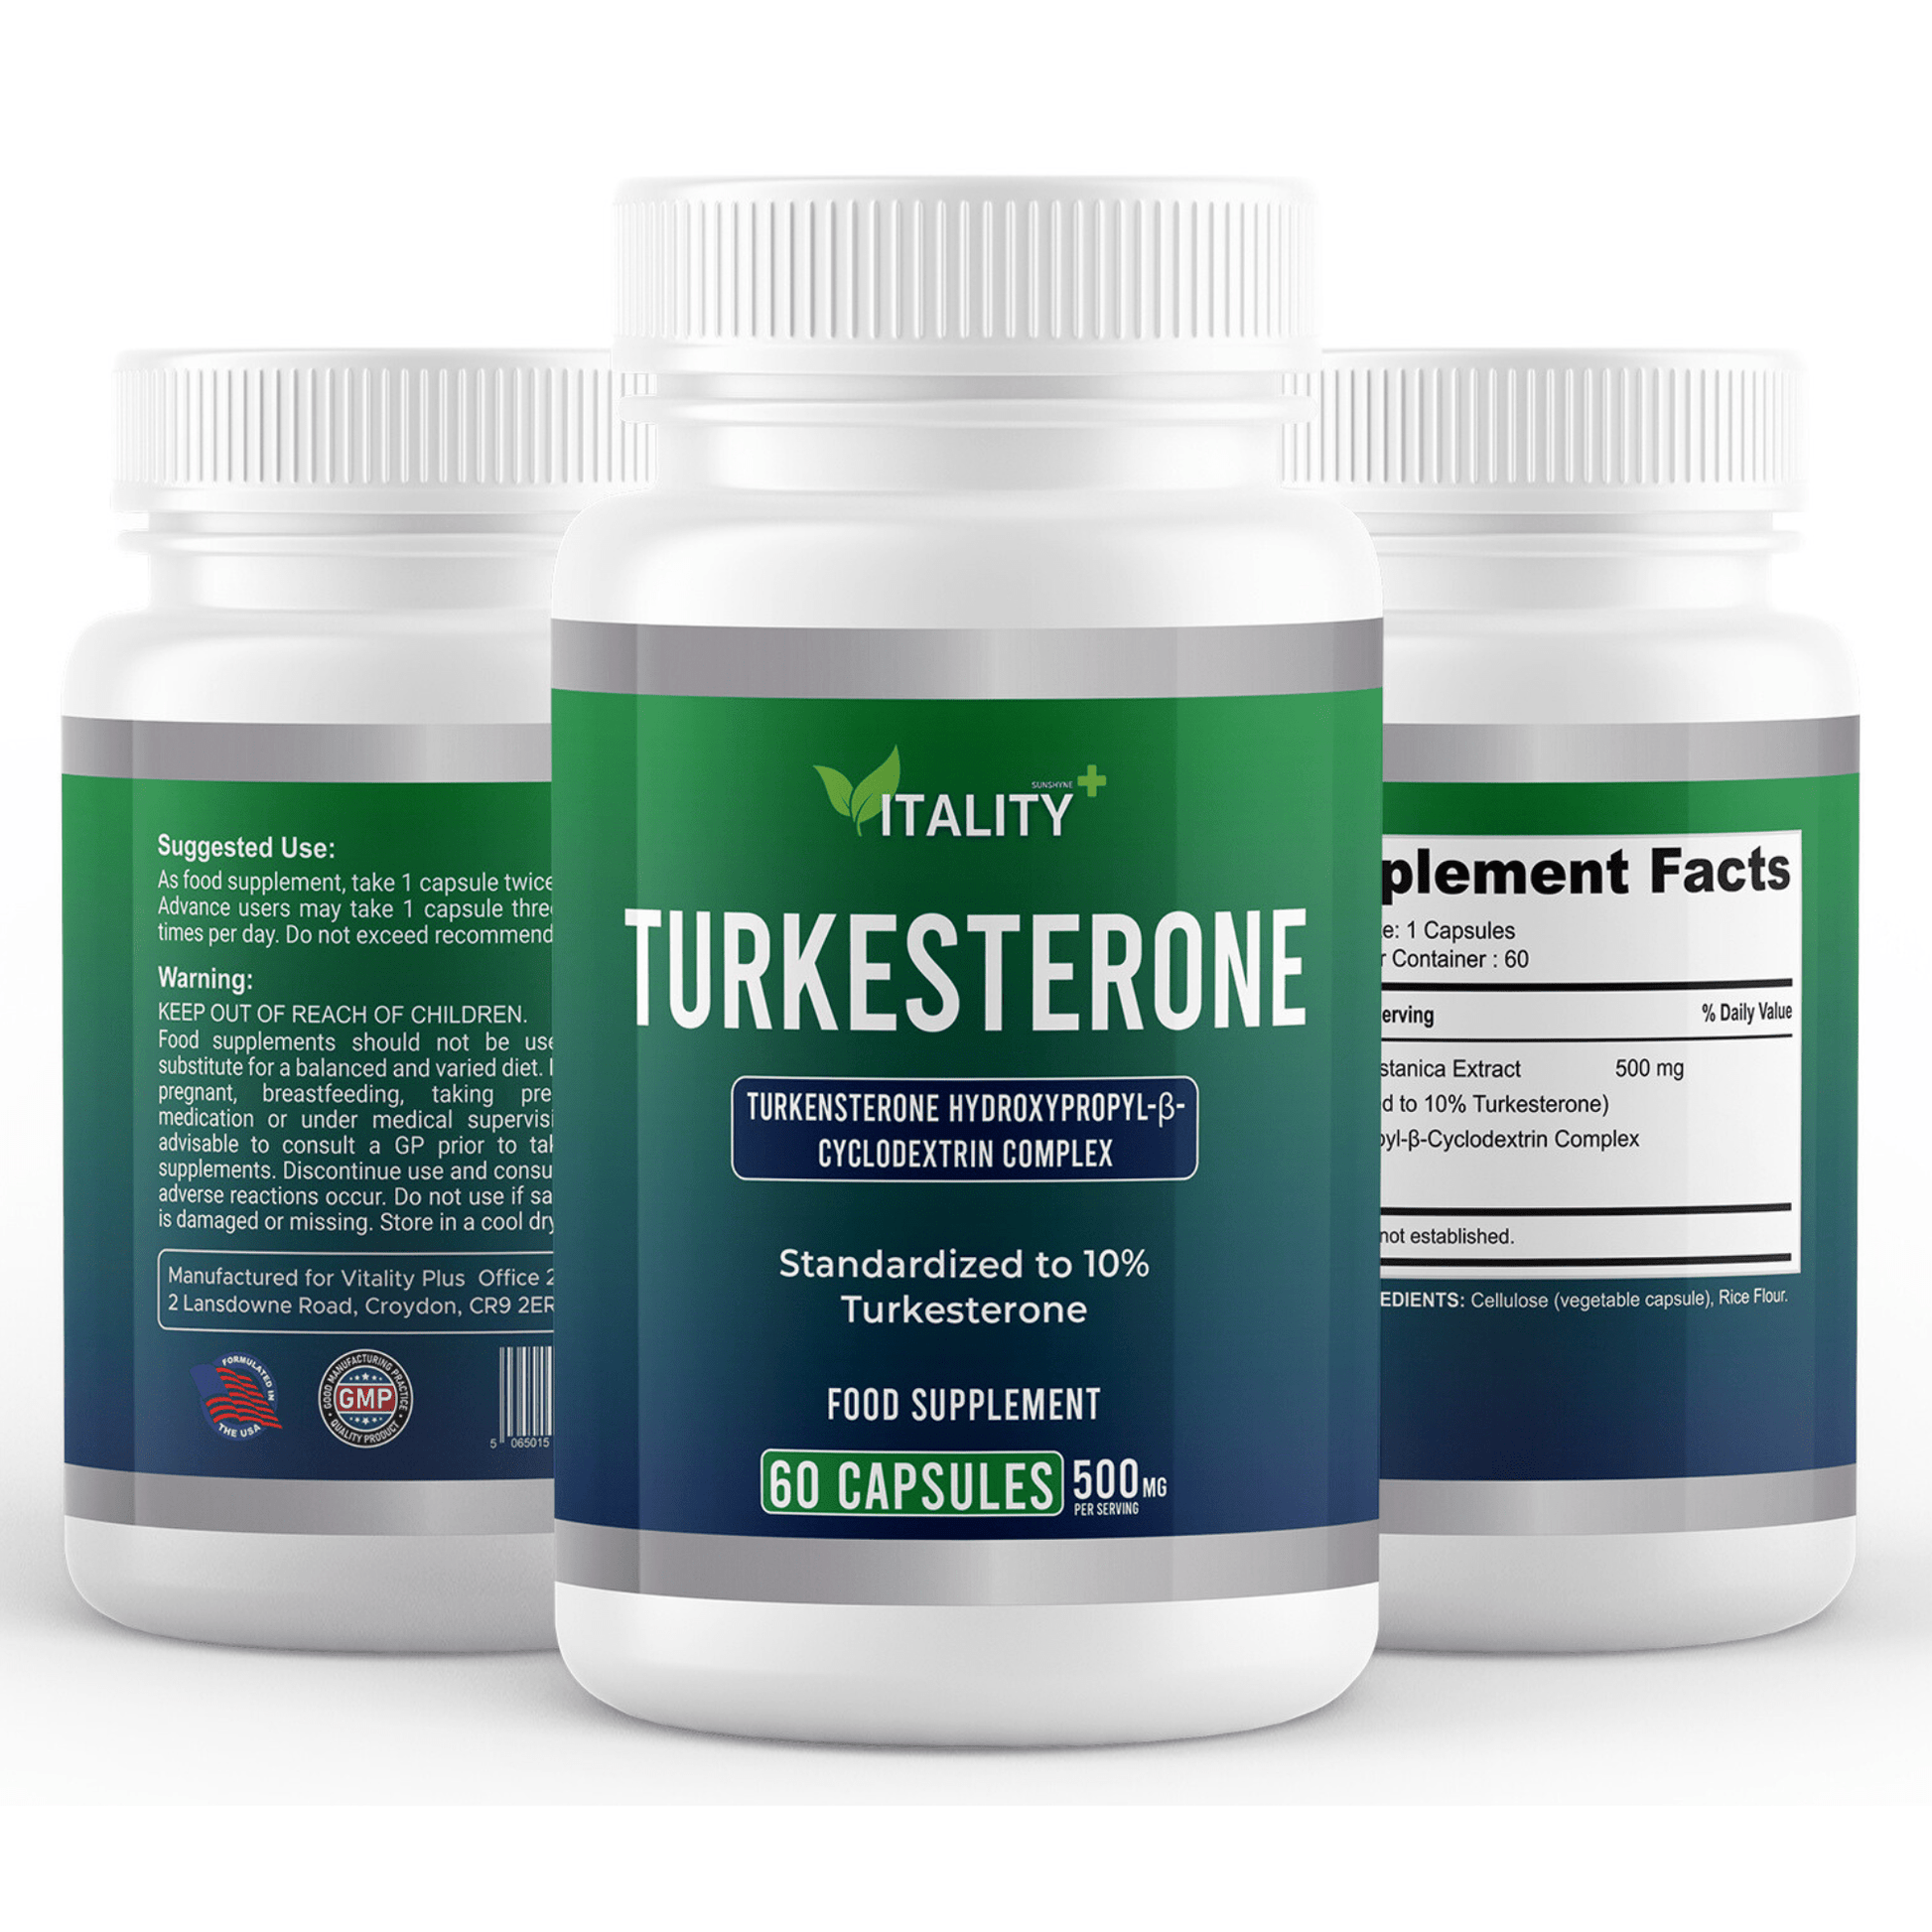 High Strength Turkesterone 500mg | 180 Capsules | 3 Month Supply - Vitality Supplements